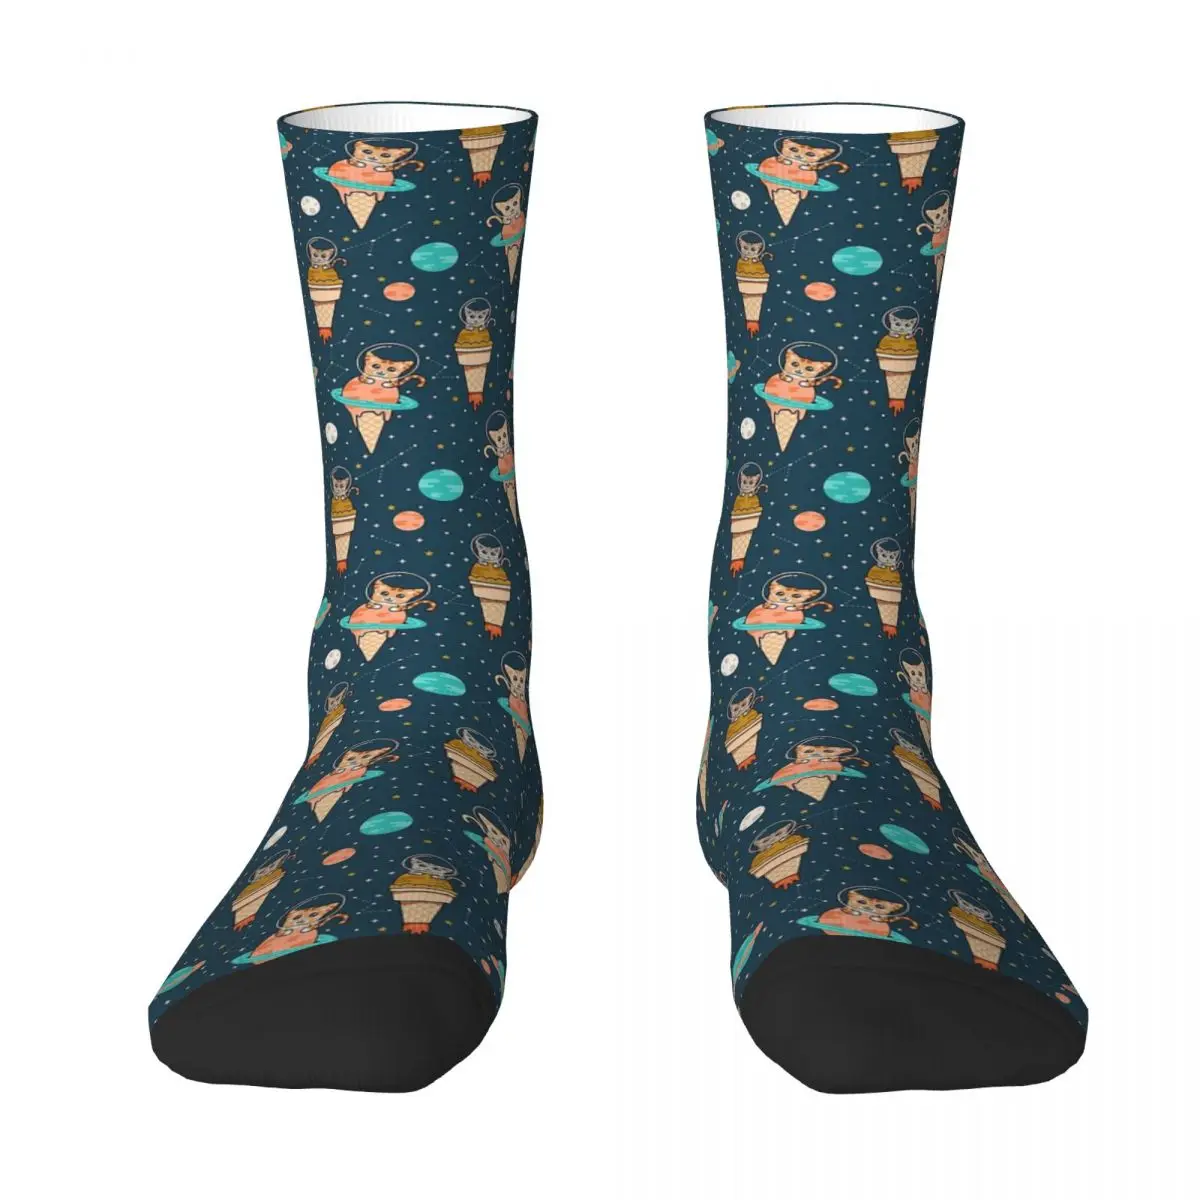 Cats Floating On Ice Cream In Space Thick Contrast Color Socks 5% Spandex Novelty Socks Middle Tube Socks Graphic Men's Socks